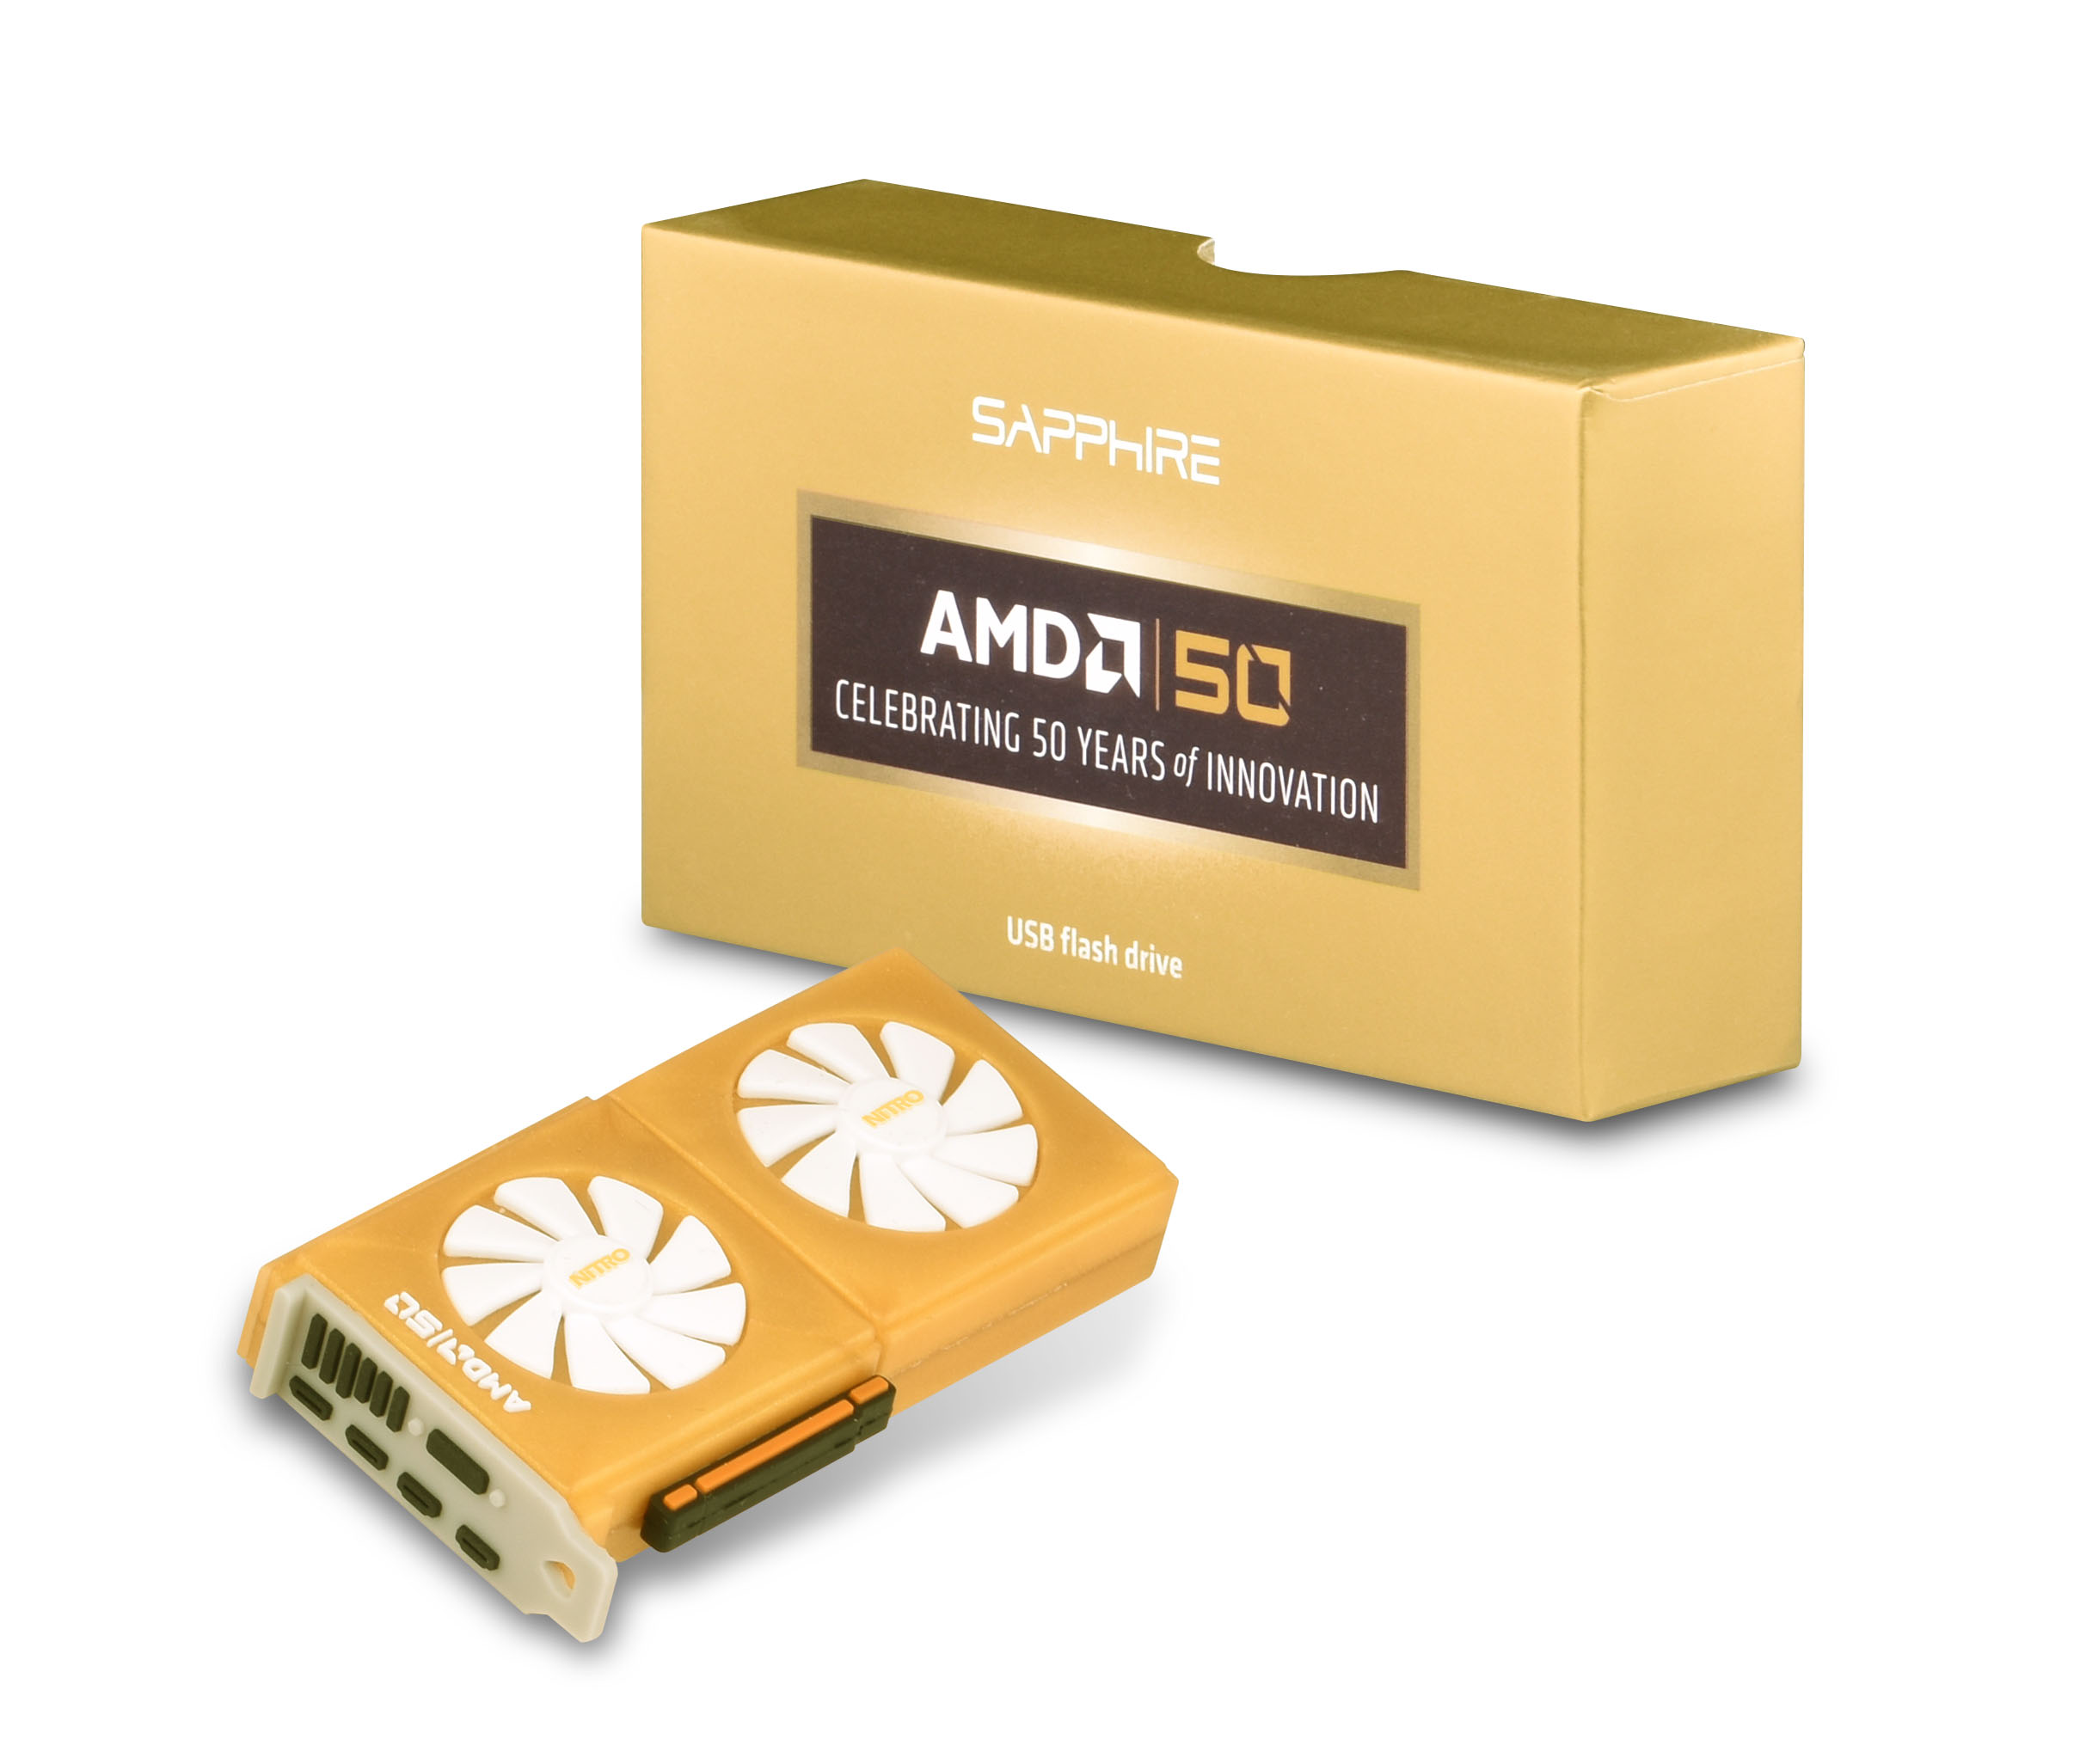 SAPPHIRE AMD USB 3.0 Flash Drive 32GB, Special Edition 50TH Anniversary Promo, Limited Edition